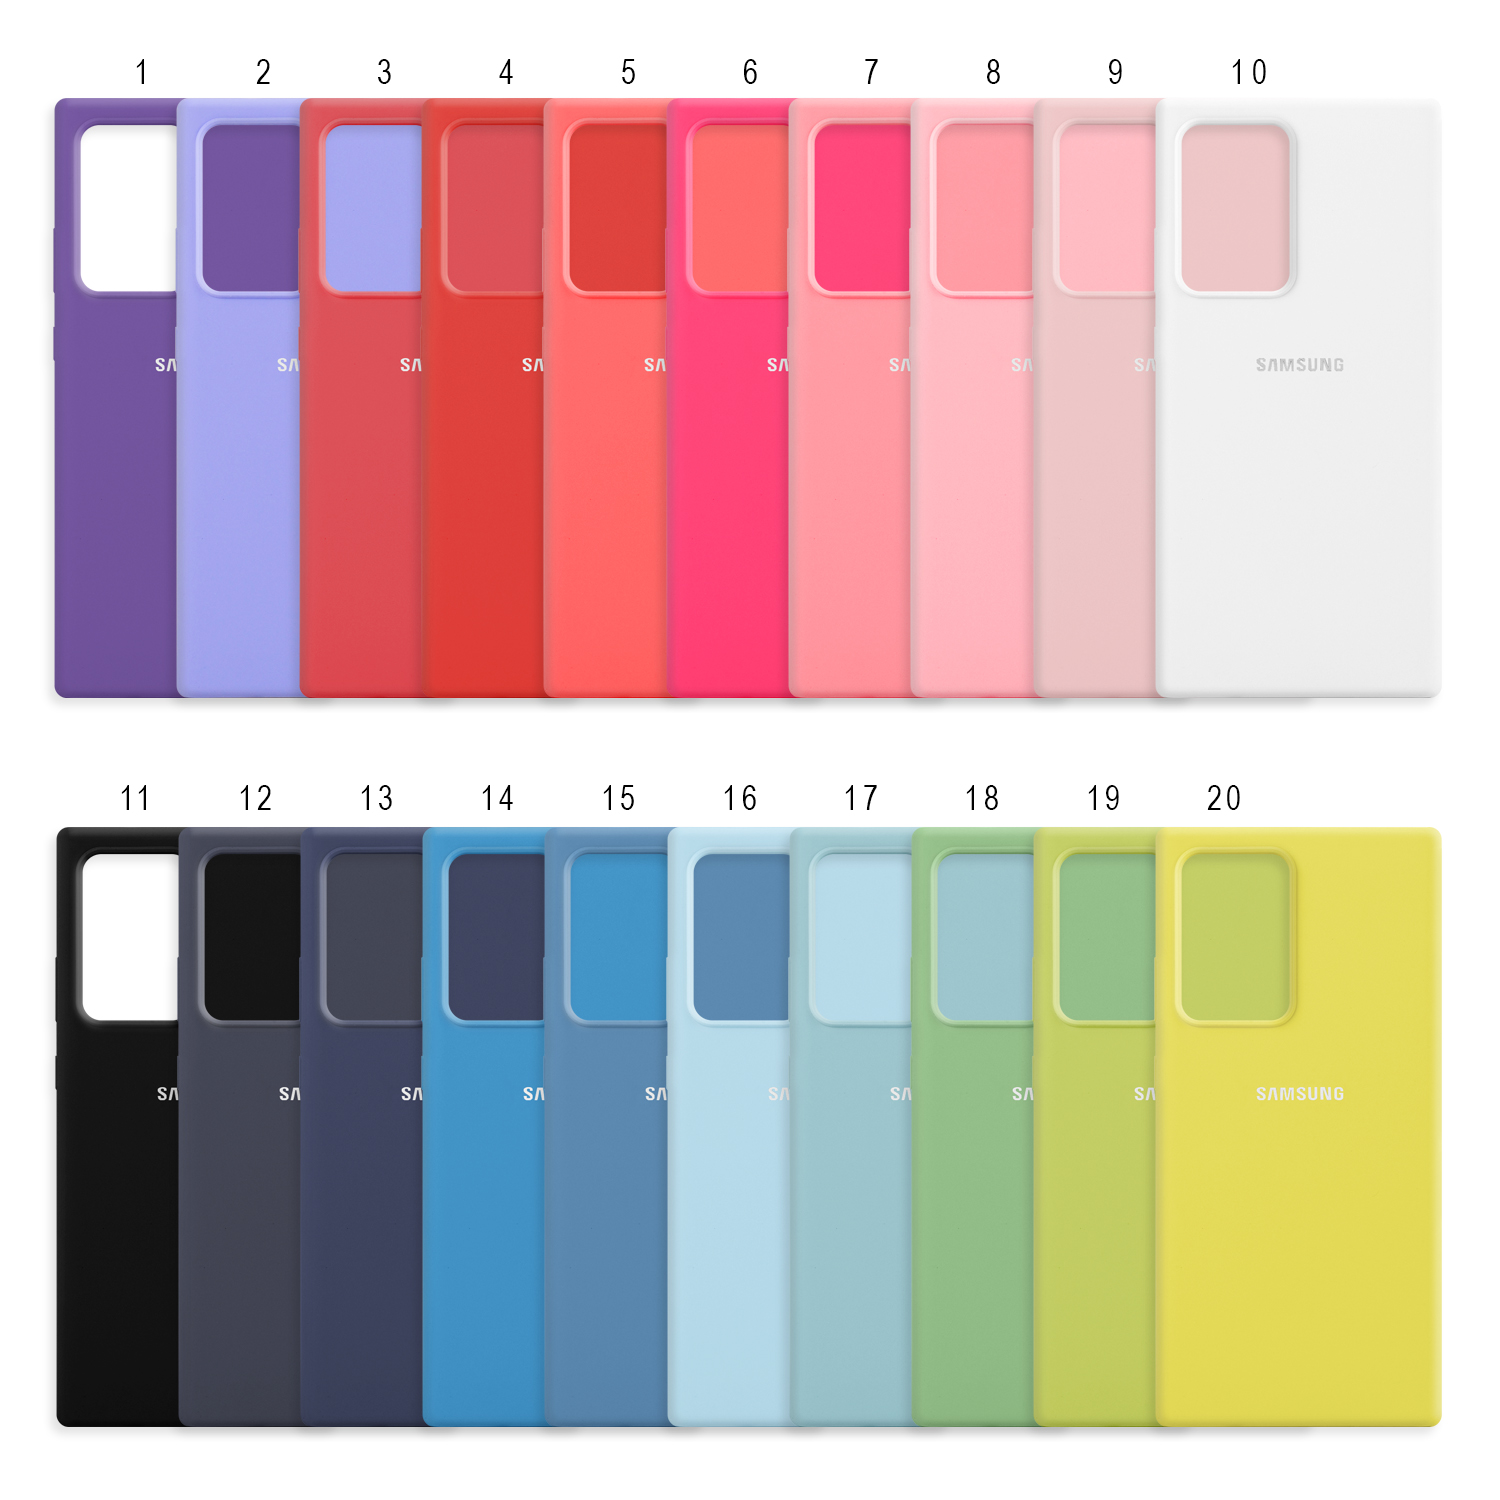 Чехол Samsung Note 20 Ultra Silicone Cover